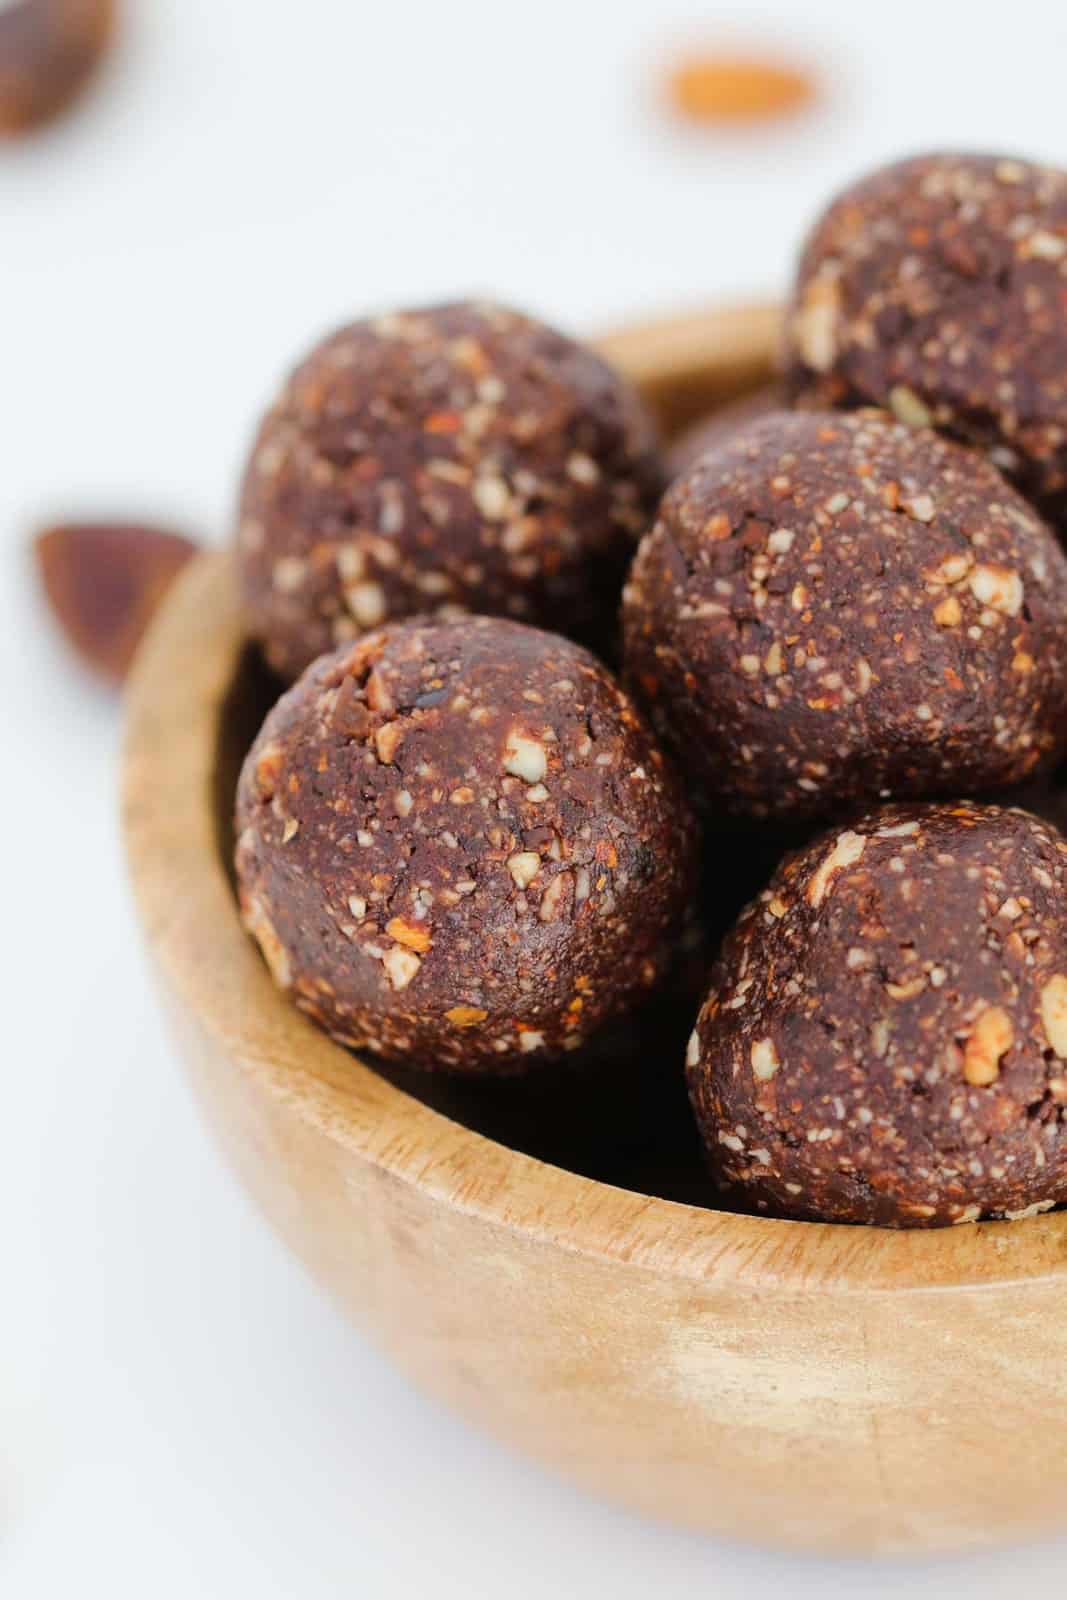 Date, almond and chocolate protein balls in a wooden bowl.